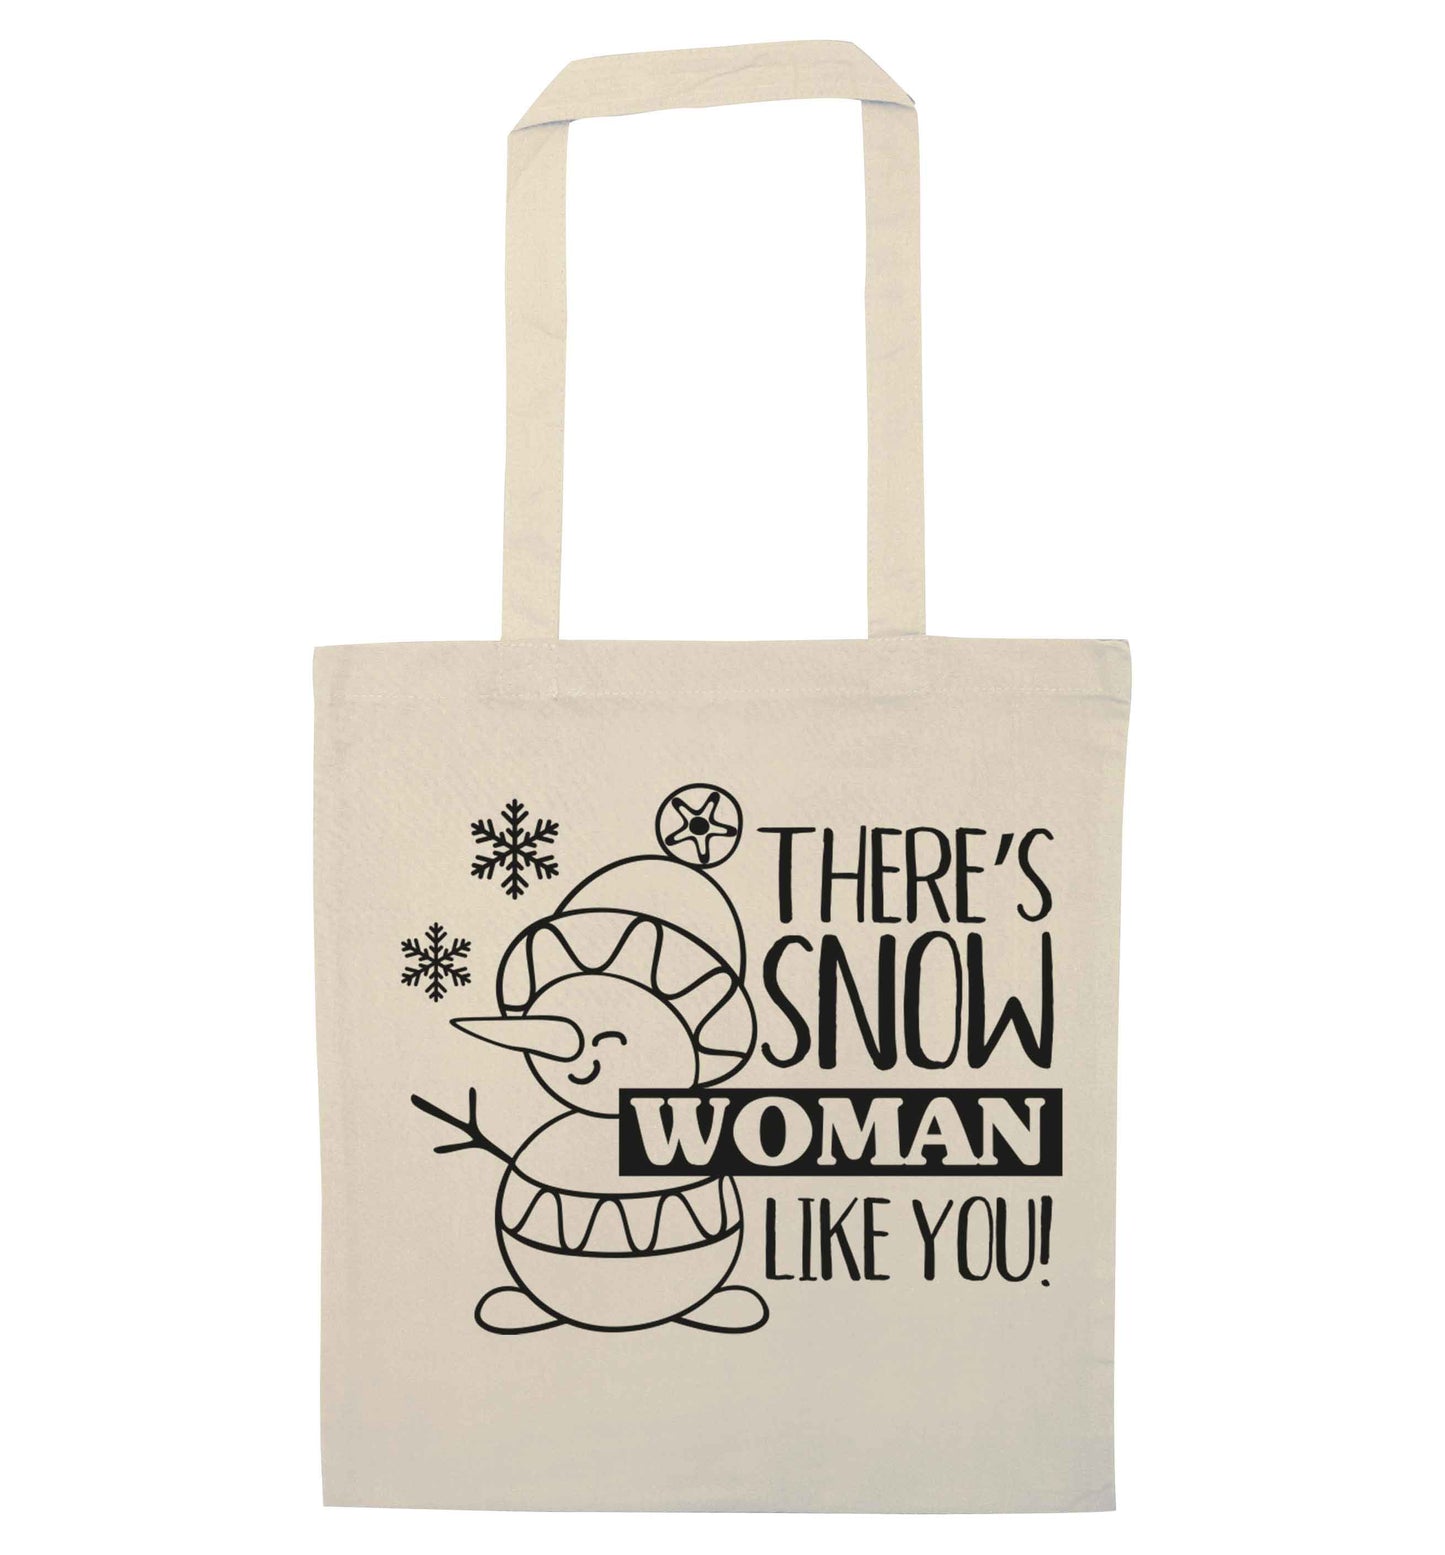 There's snow woman like you natural tote bag